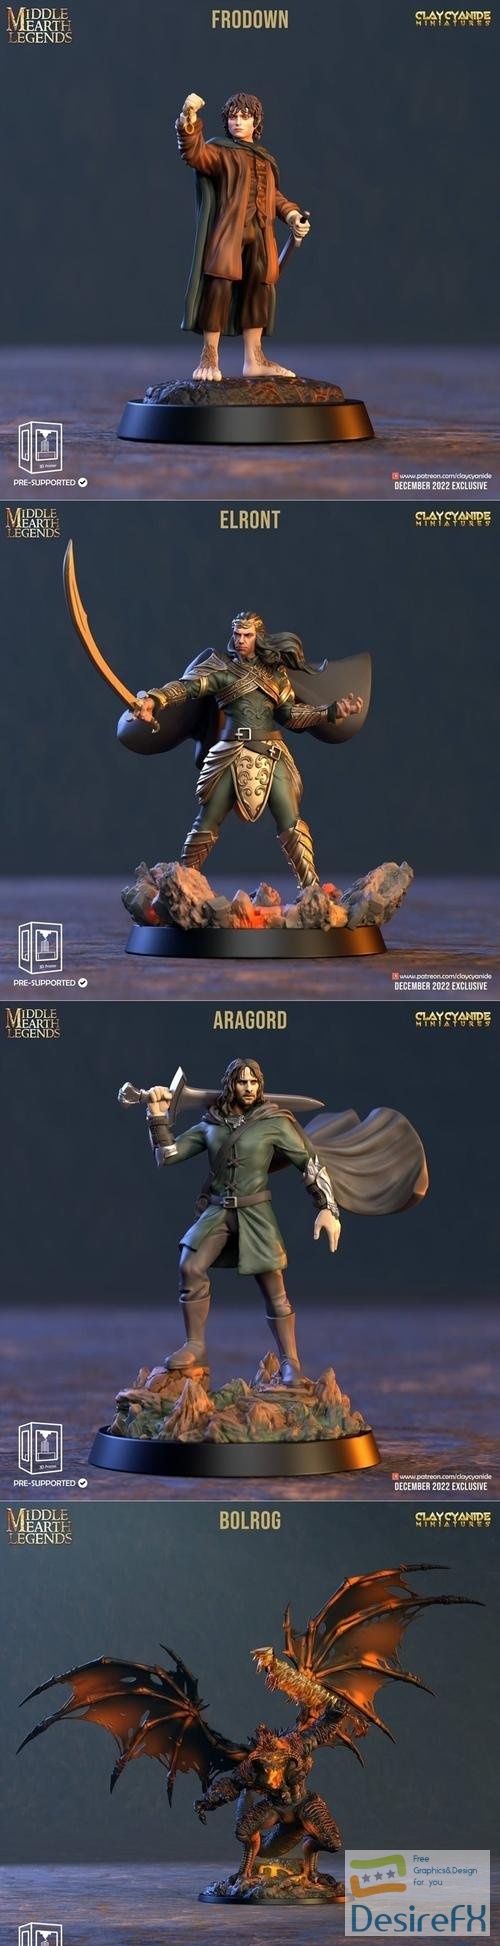 Clay Cyanide Miniatures - Aragorn and Balrog and Elrond and Frodo – 3D Print